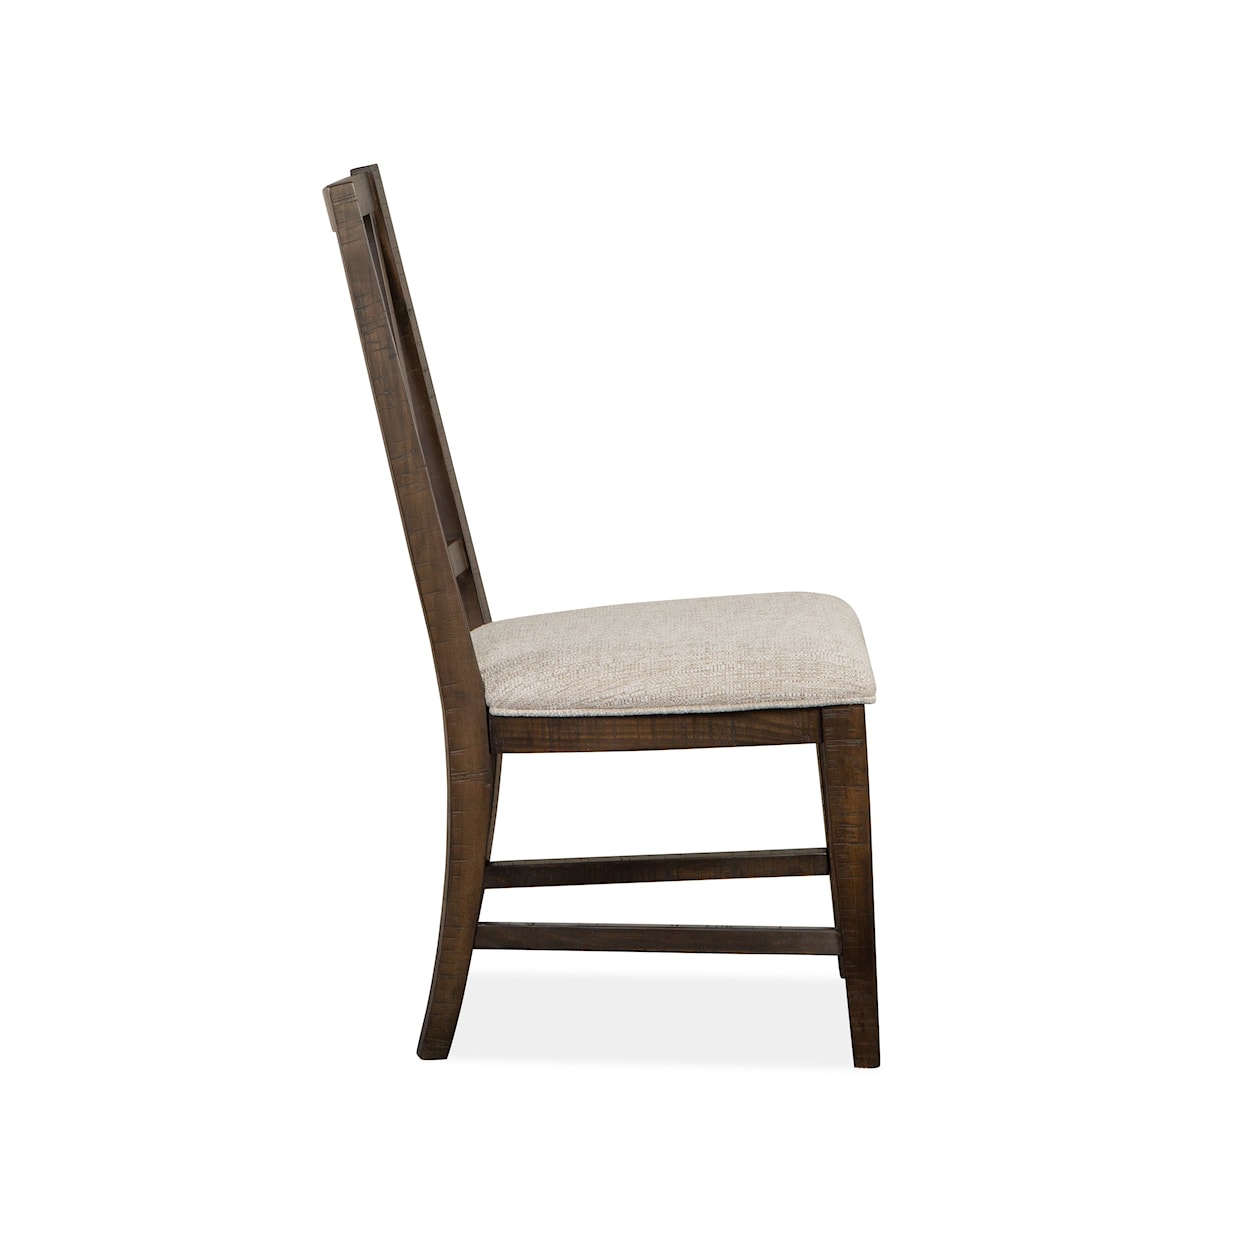 Magnussen Home Westley Falls Dining Dining Side Chair w/ Upholstered Seat